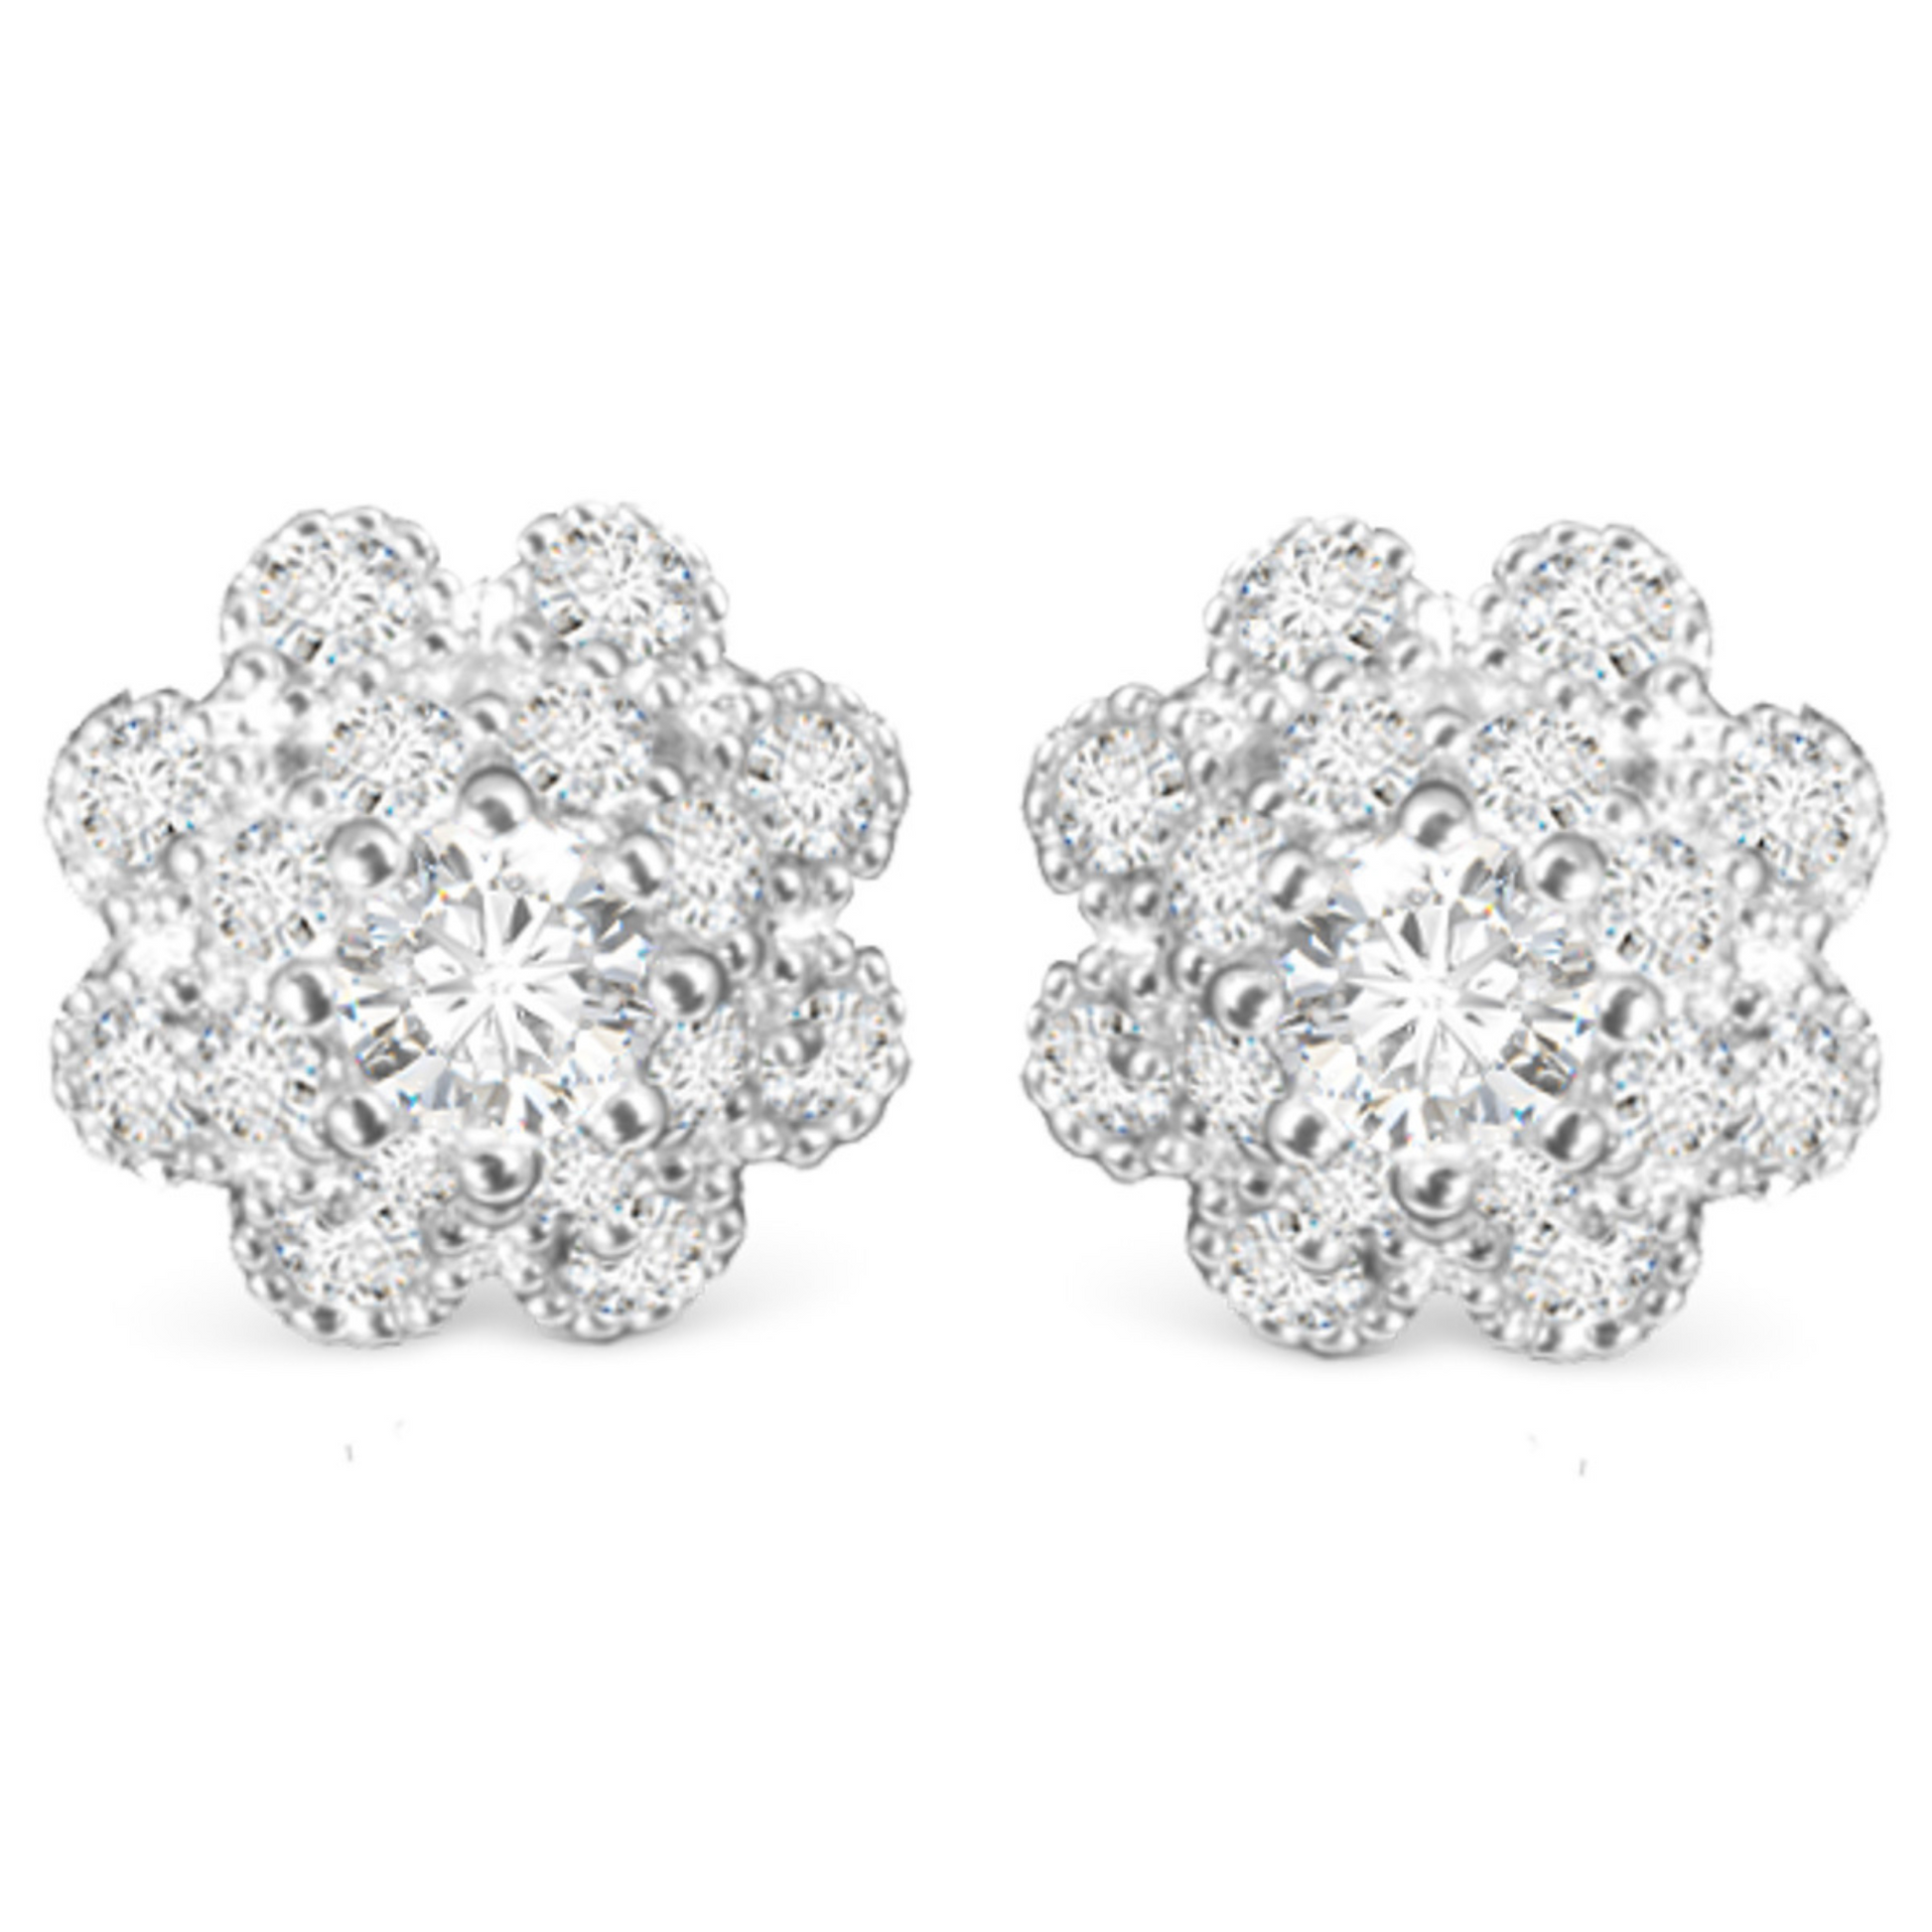 These Flower Stud Earrings feature a stunning silver design with delicate rhinestone accents. The flower design adds a touch of elegant charm to any outfit. Expertly crafted, they are the perfect addition to your jewelry collection.